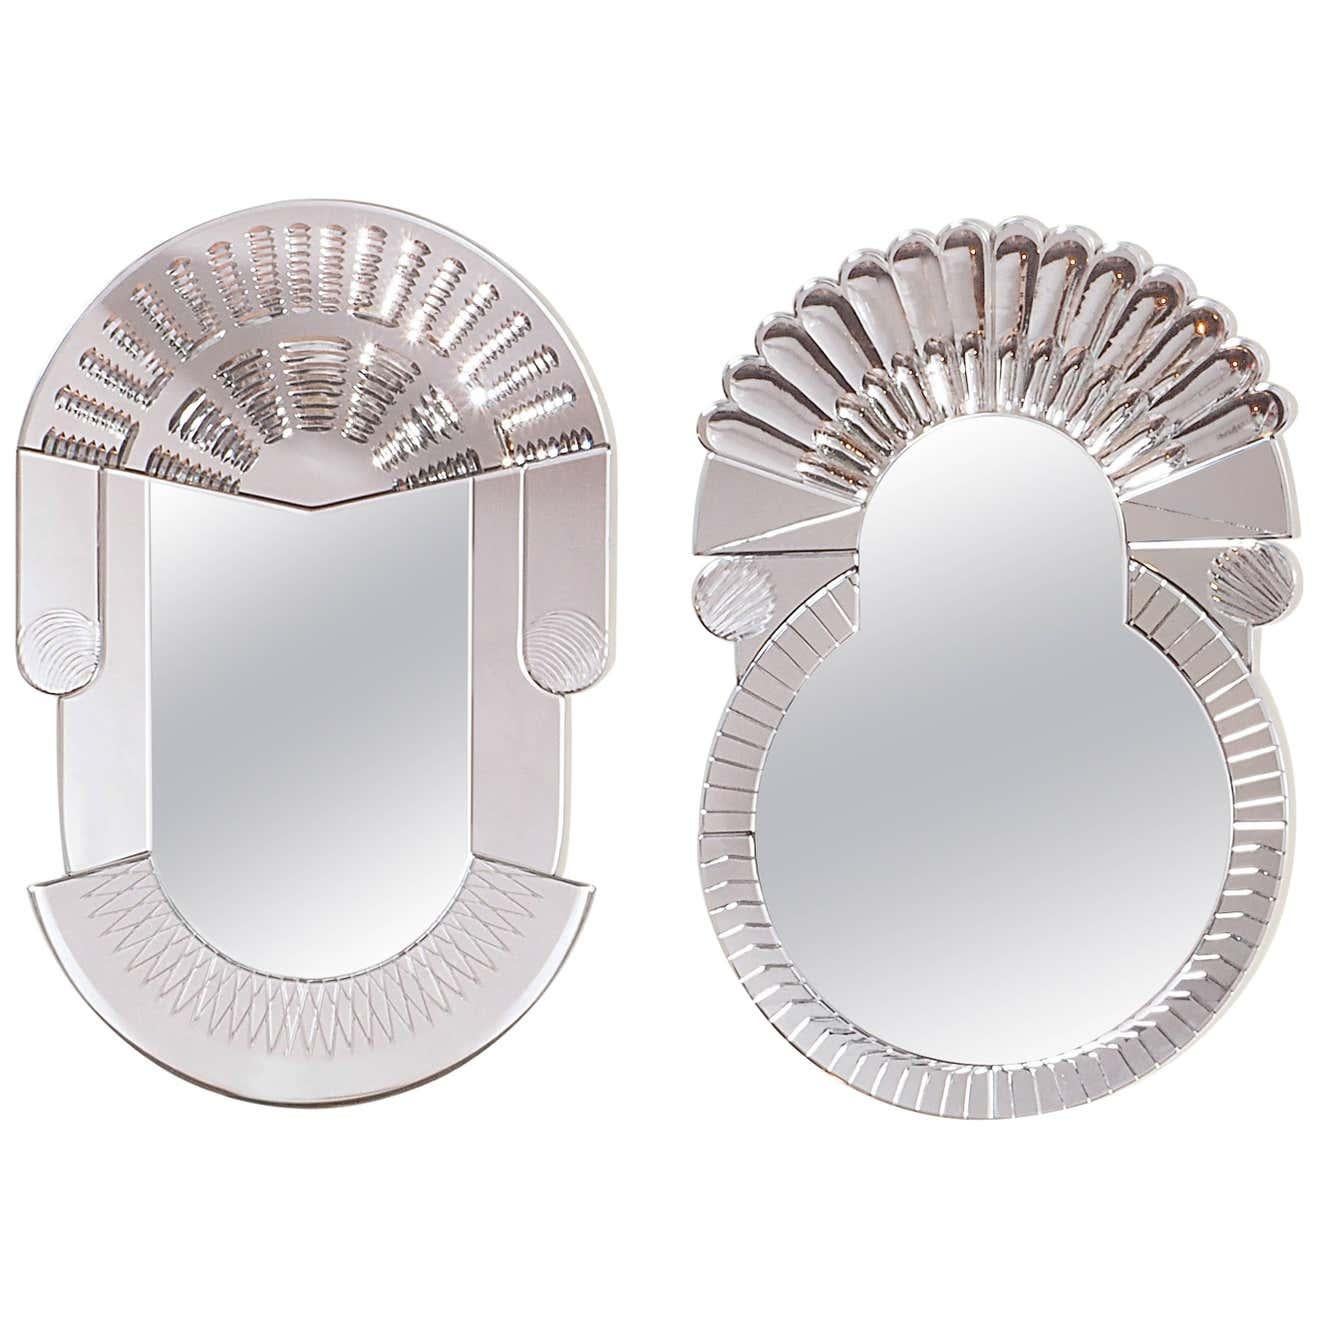 Set of 2 Large Scena Murano Mirrors by Nikolai Kotlarczyk 
Dimensions: 
Olympic: D 3 x W 60 x H 90 cm 
Rotonda: D 3 x W 60 x H 90 cm 
Materials: silvered carved glass, golden carved polished steel. Nembro marble (base).
Also available in